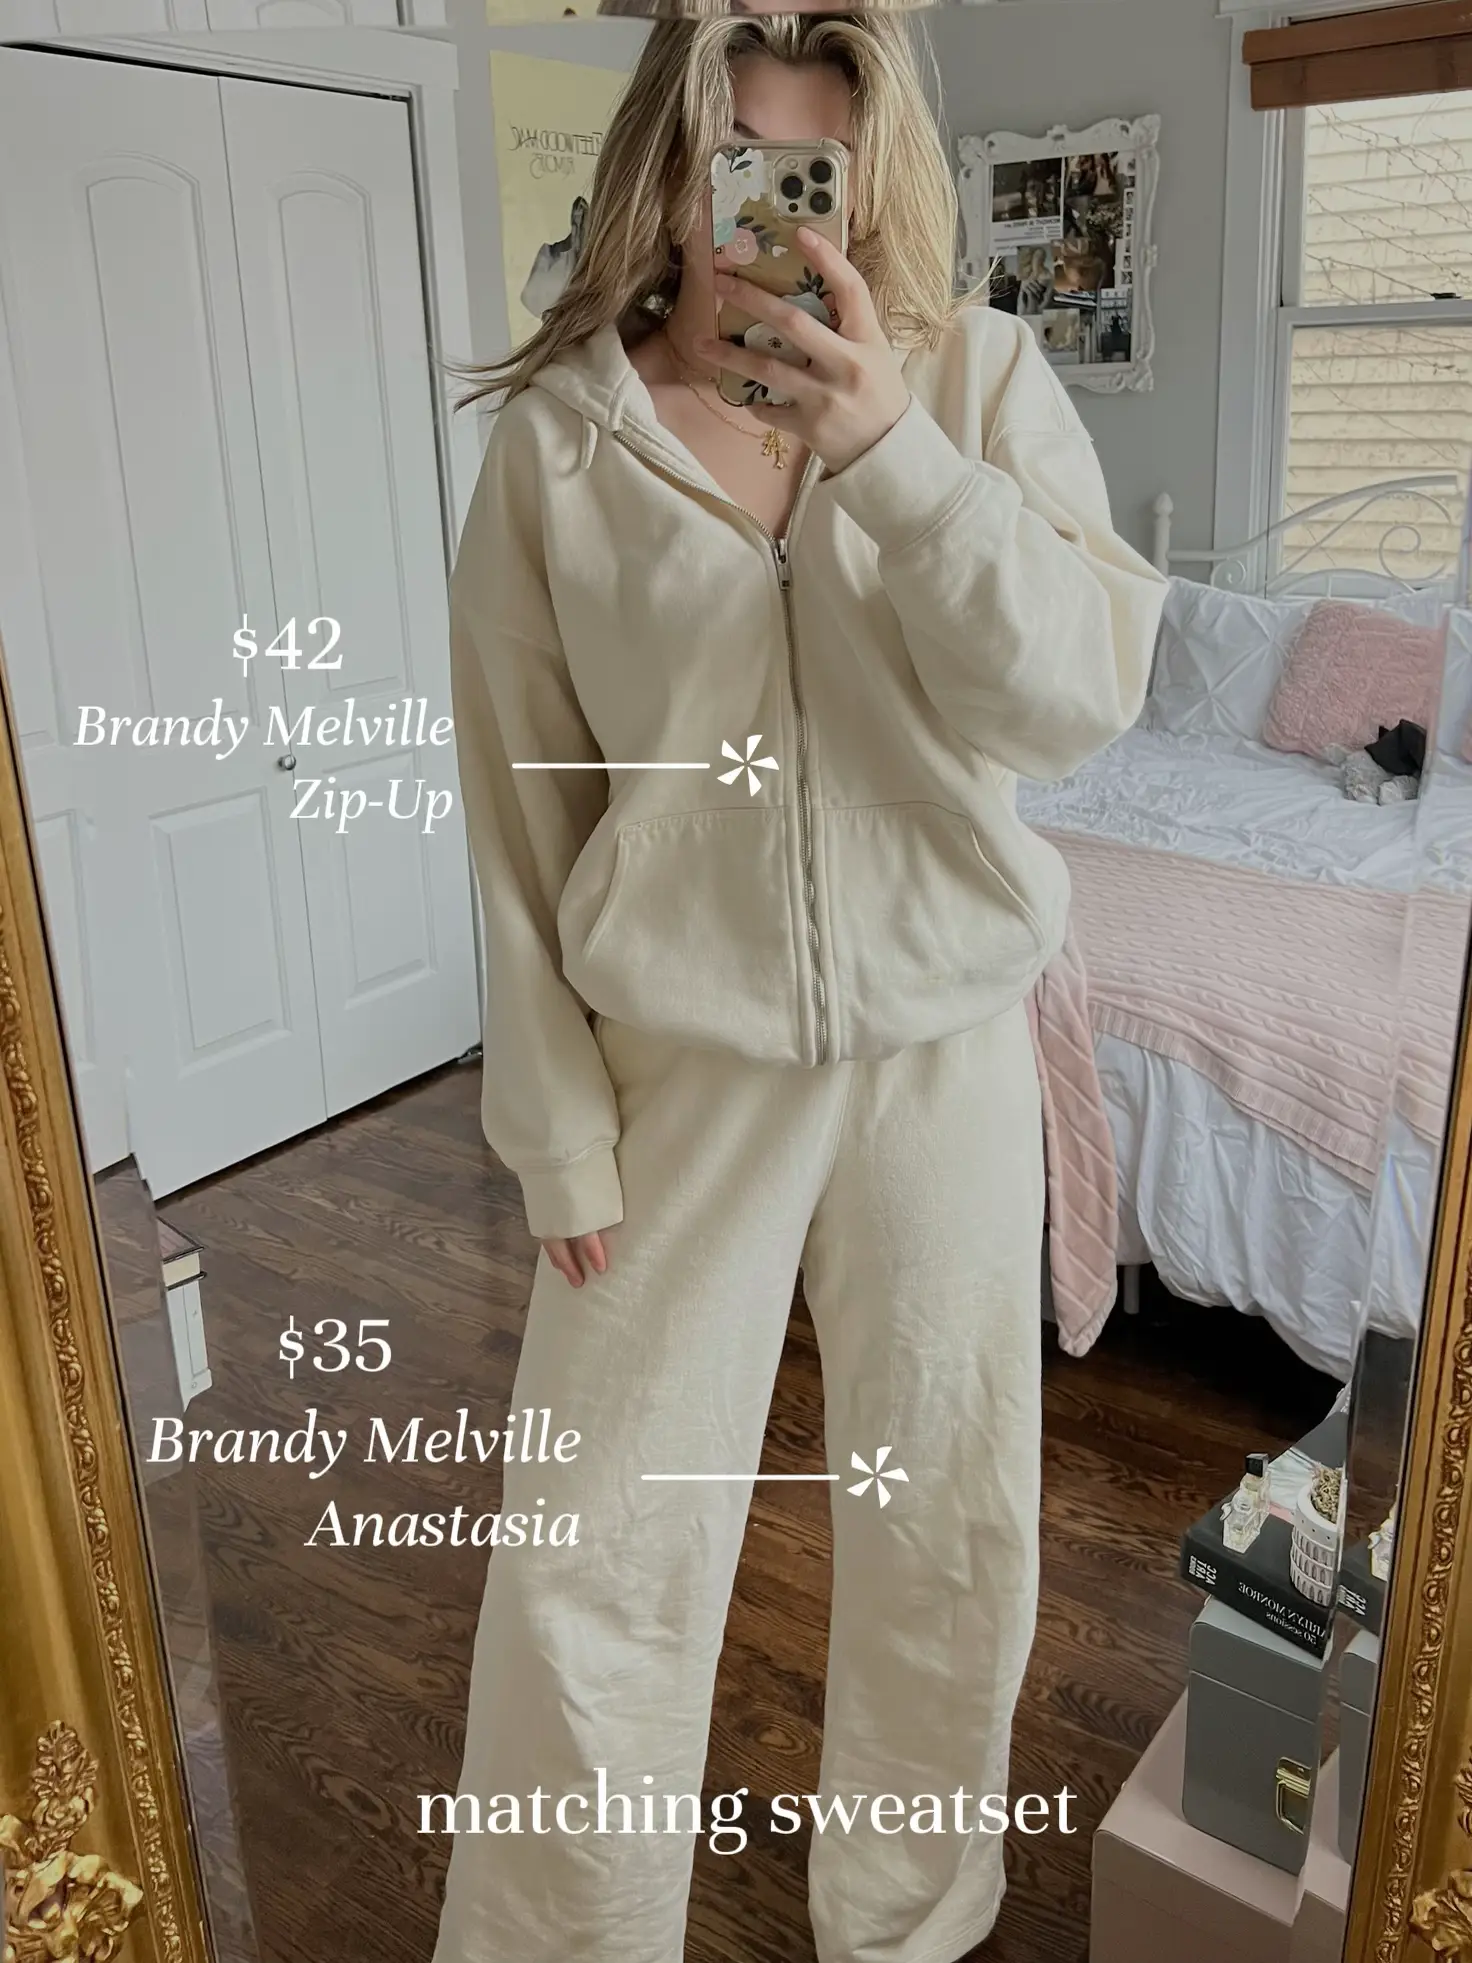 Is this Define Jacket authentic? I bought off Poshmark and it seems very  sketchy to me : r/lululemon